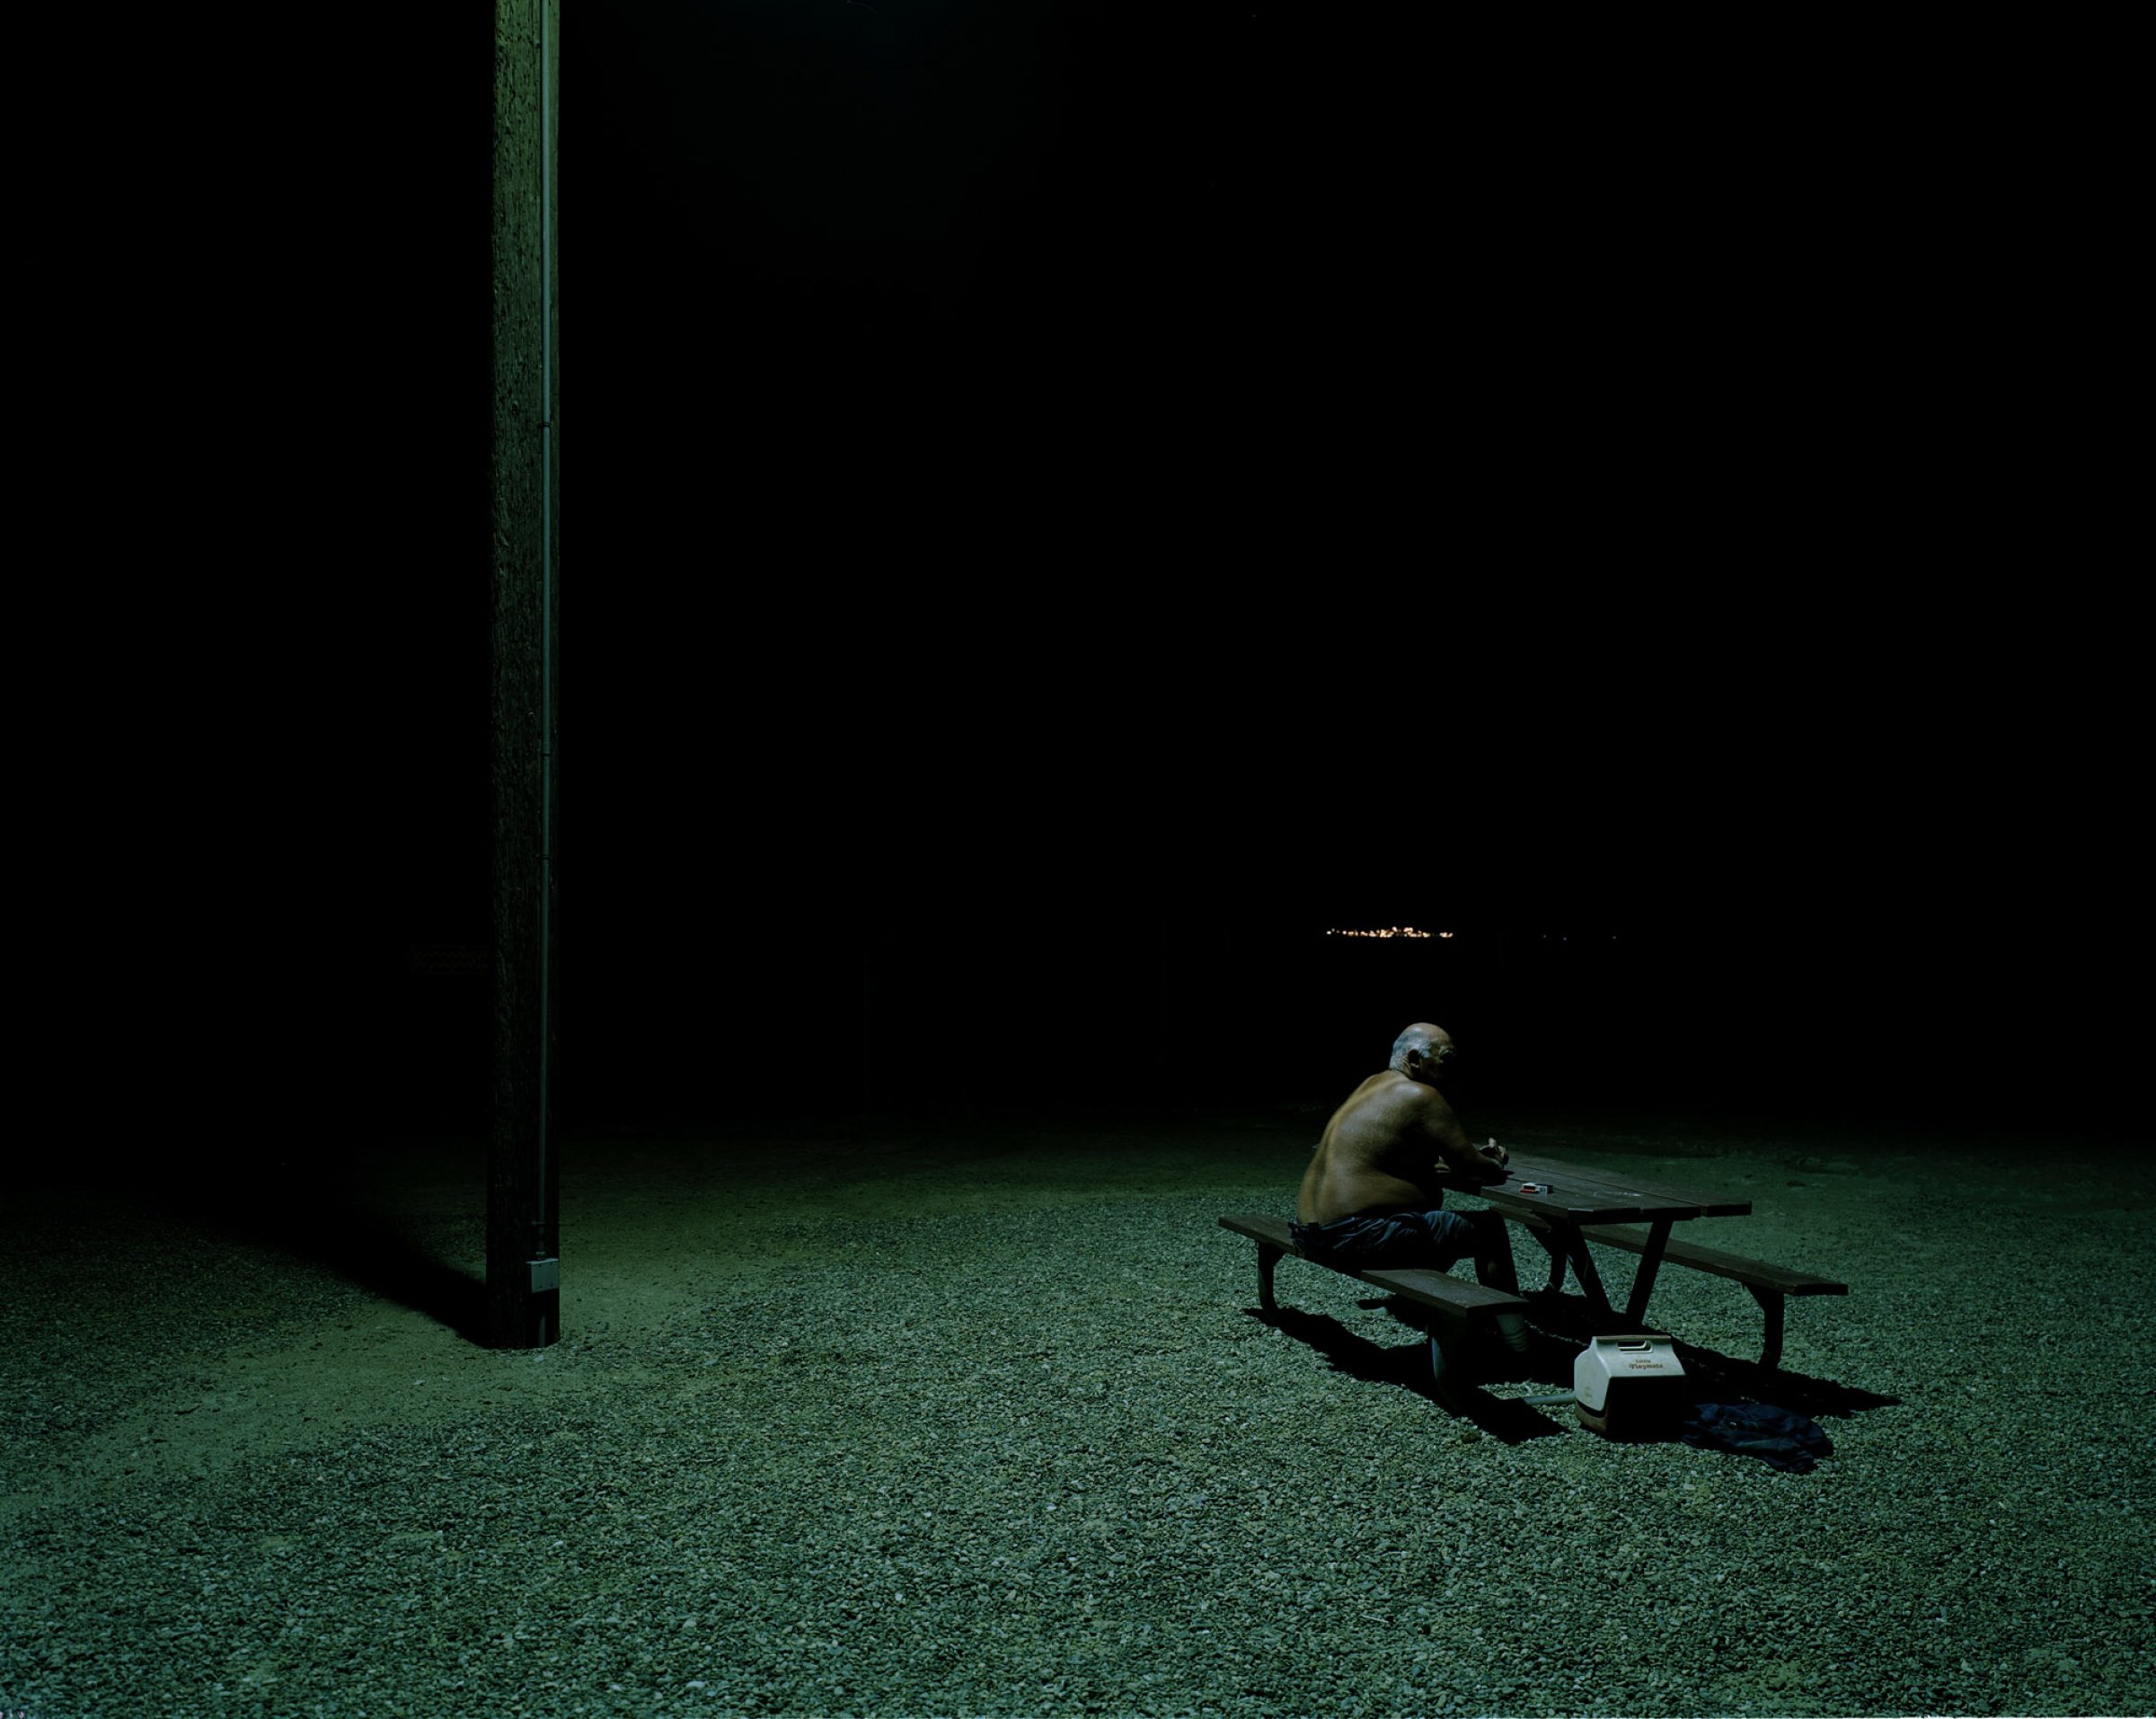 Lone person, seen from the back, sitting at a picnic table in a park at night